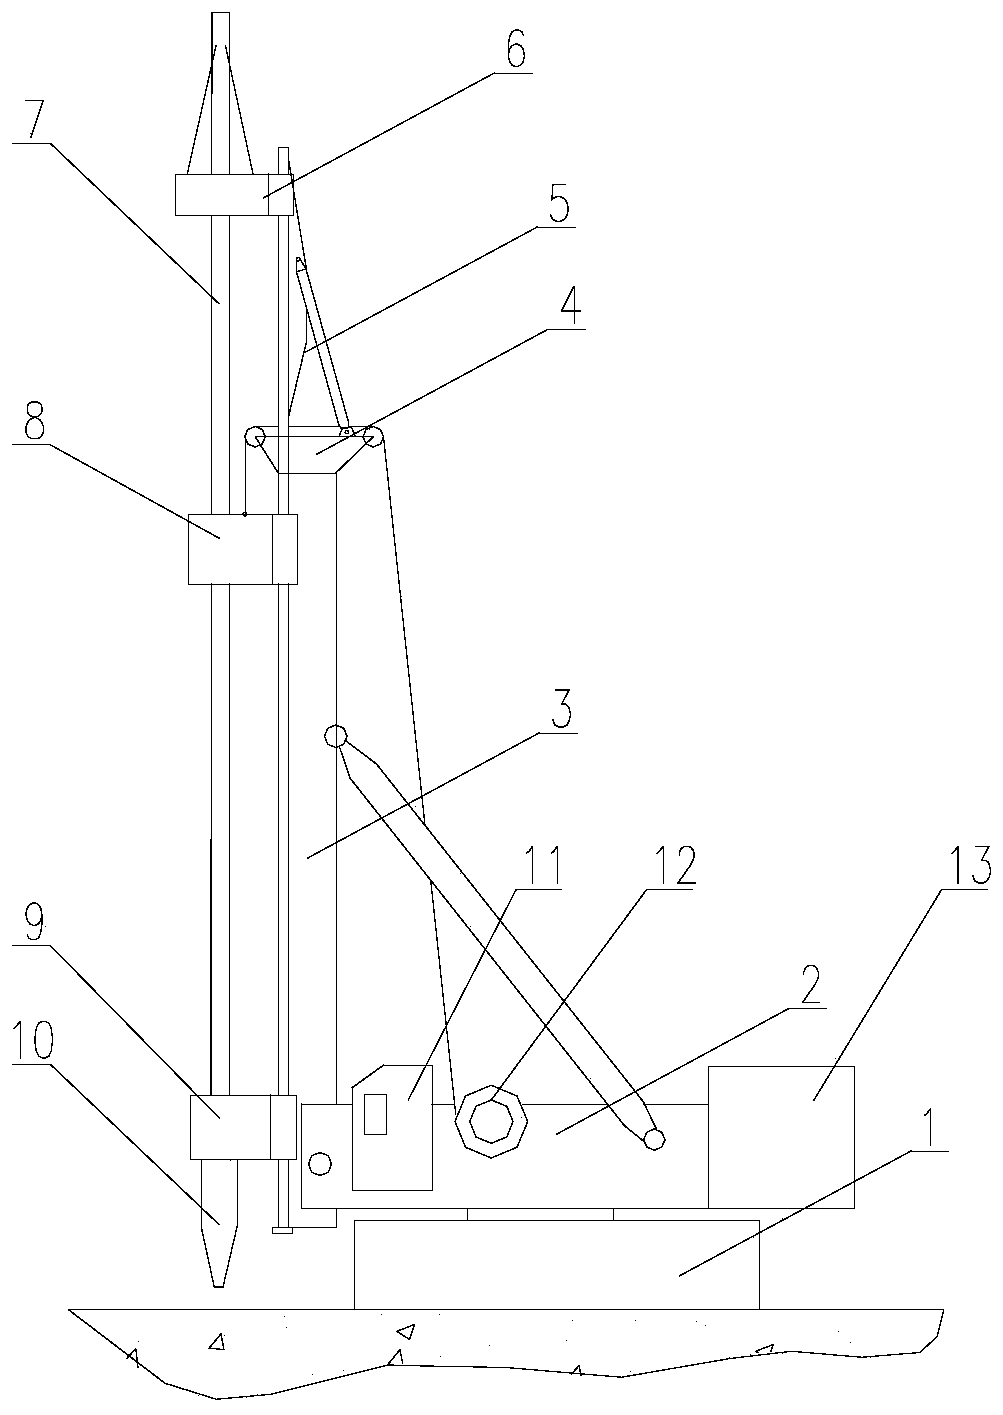 A pile machine with the function of following and supporting the drill pipe